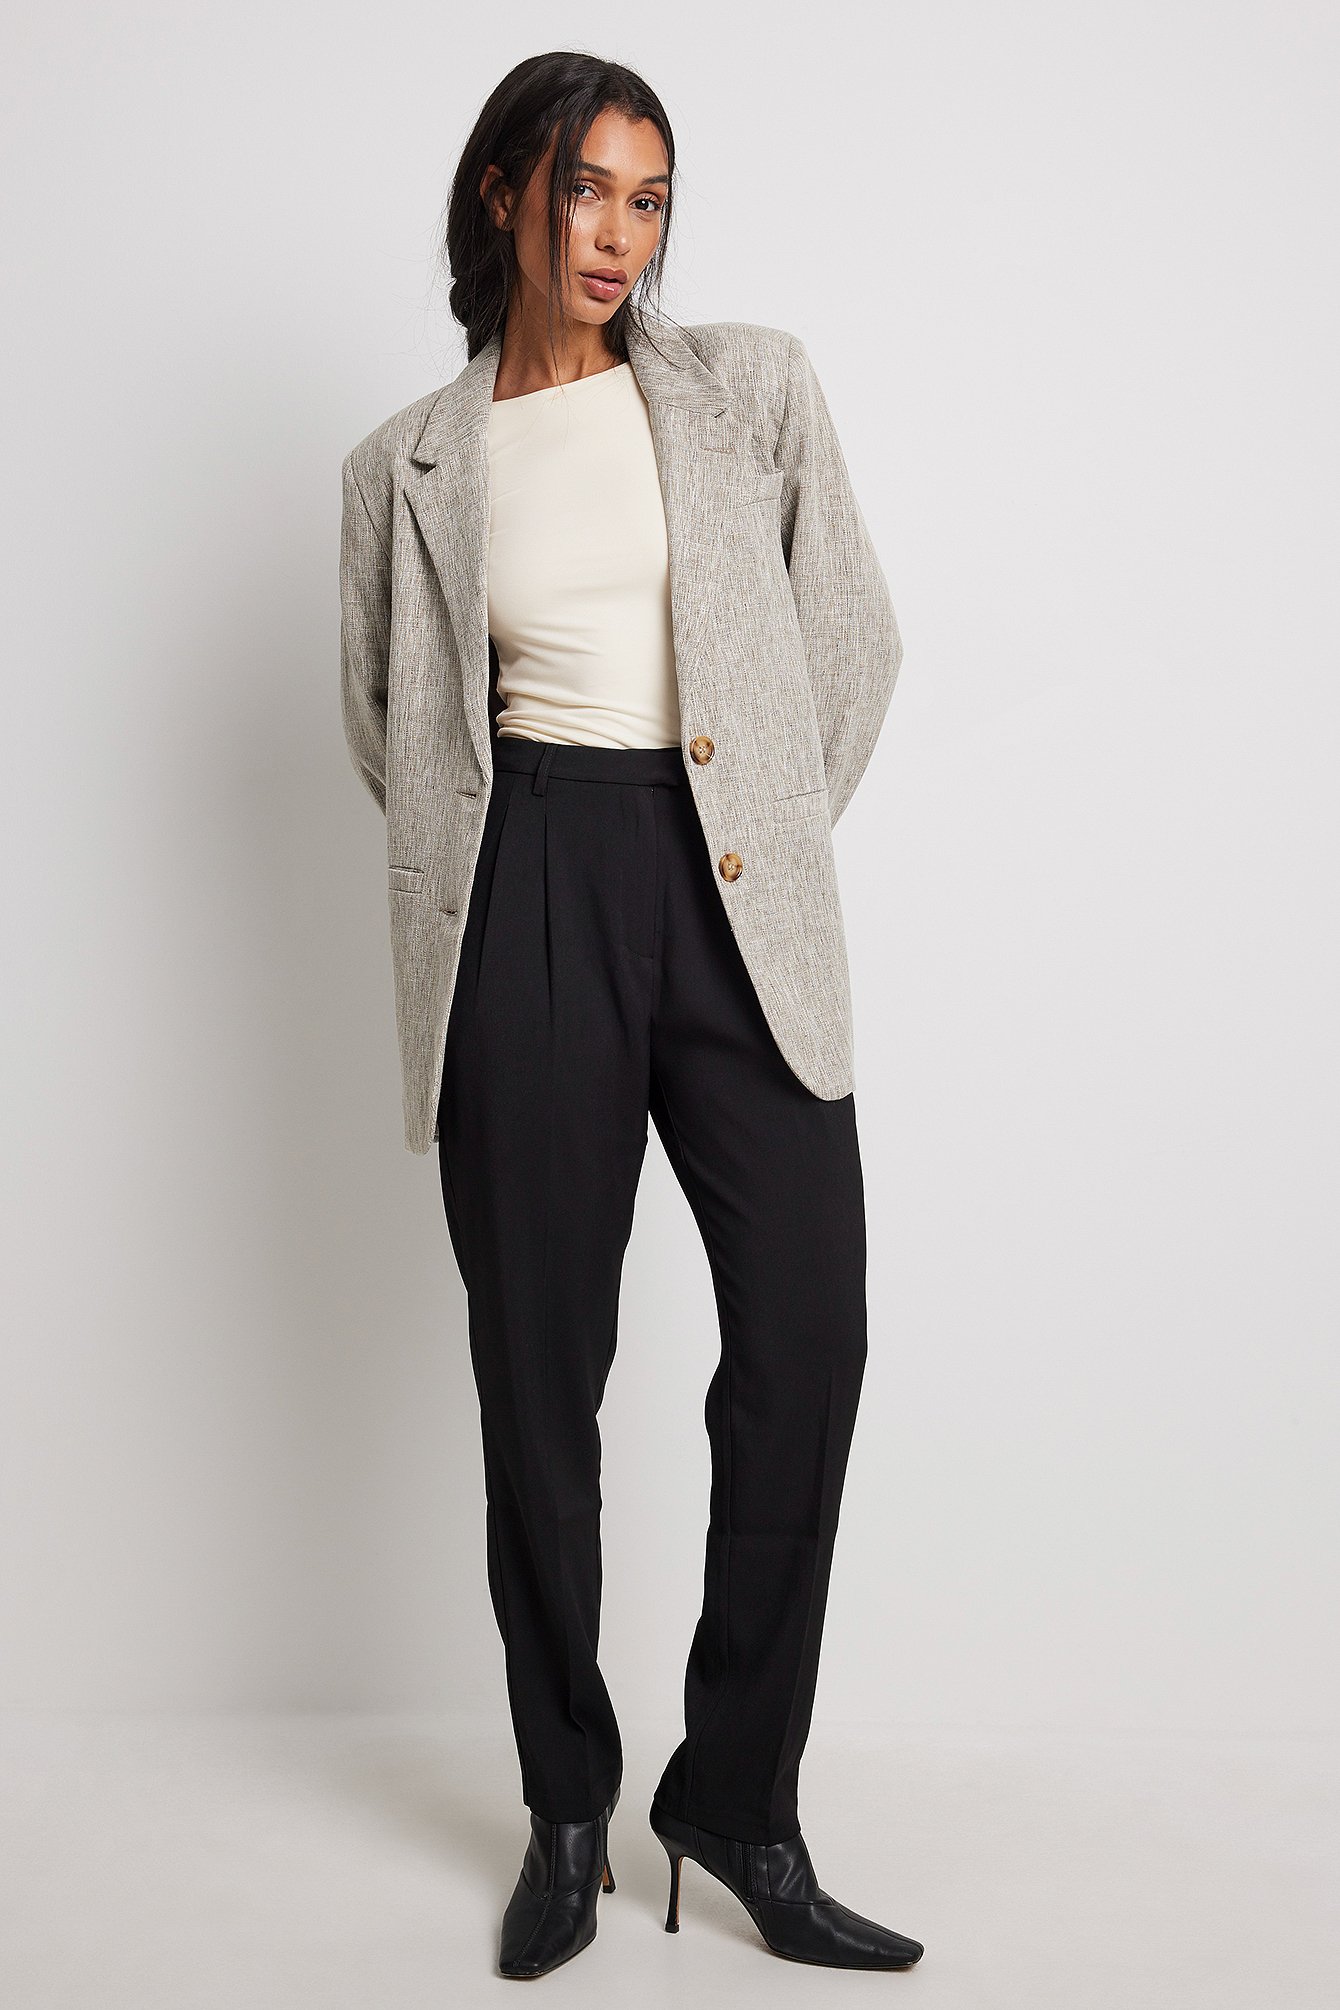 Cropped High Waist Suit Pants Outfit.